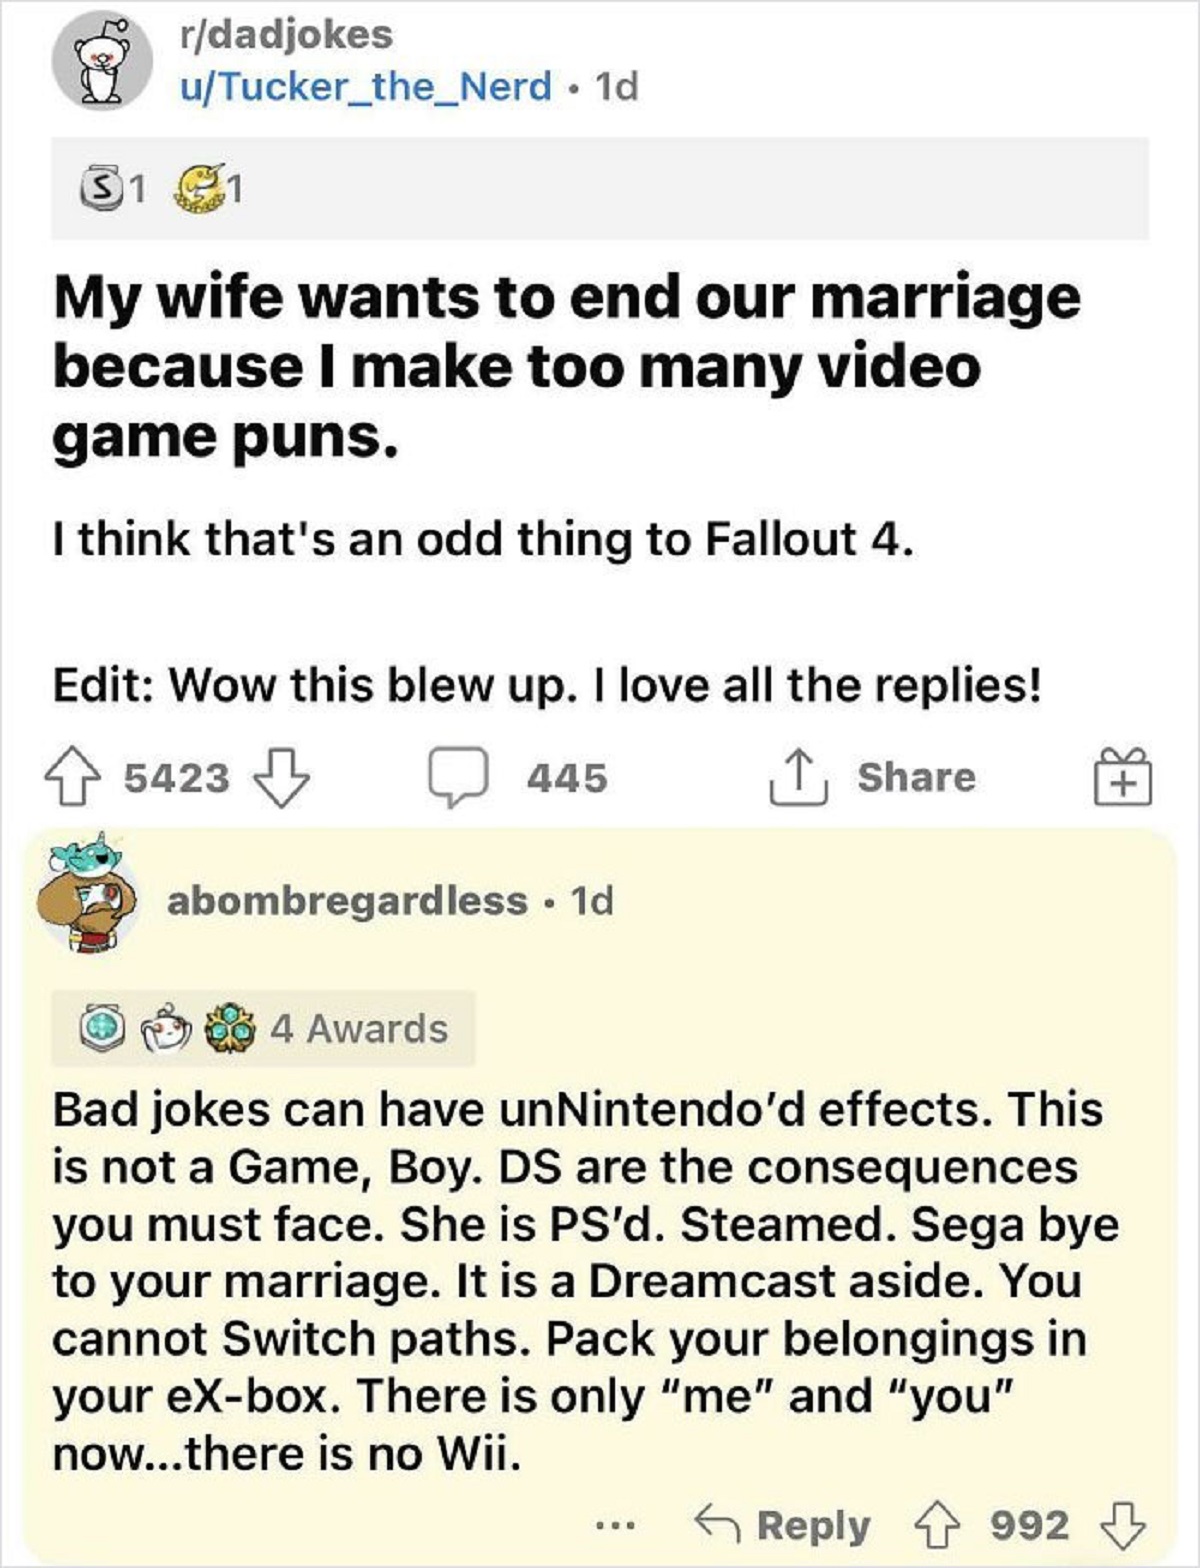 funny replies better than the original - document - rdadjokes uTucker_the_Nerd. 1d 31 My wife wants to end our marriage because I make too many video game puns. I think that's an odd thing to Fallout 4. Edit Wow this blew up. I love all the replies! 5423 